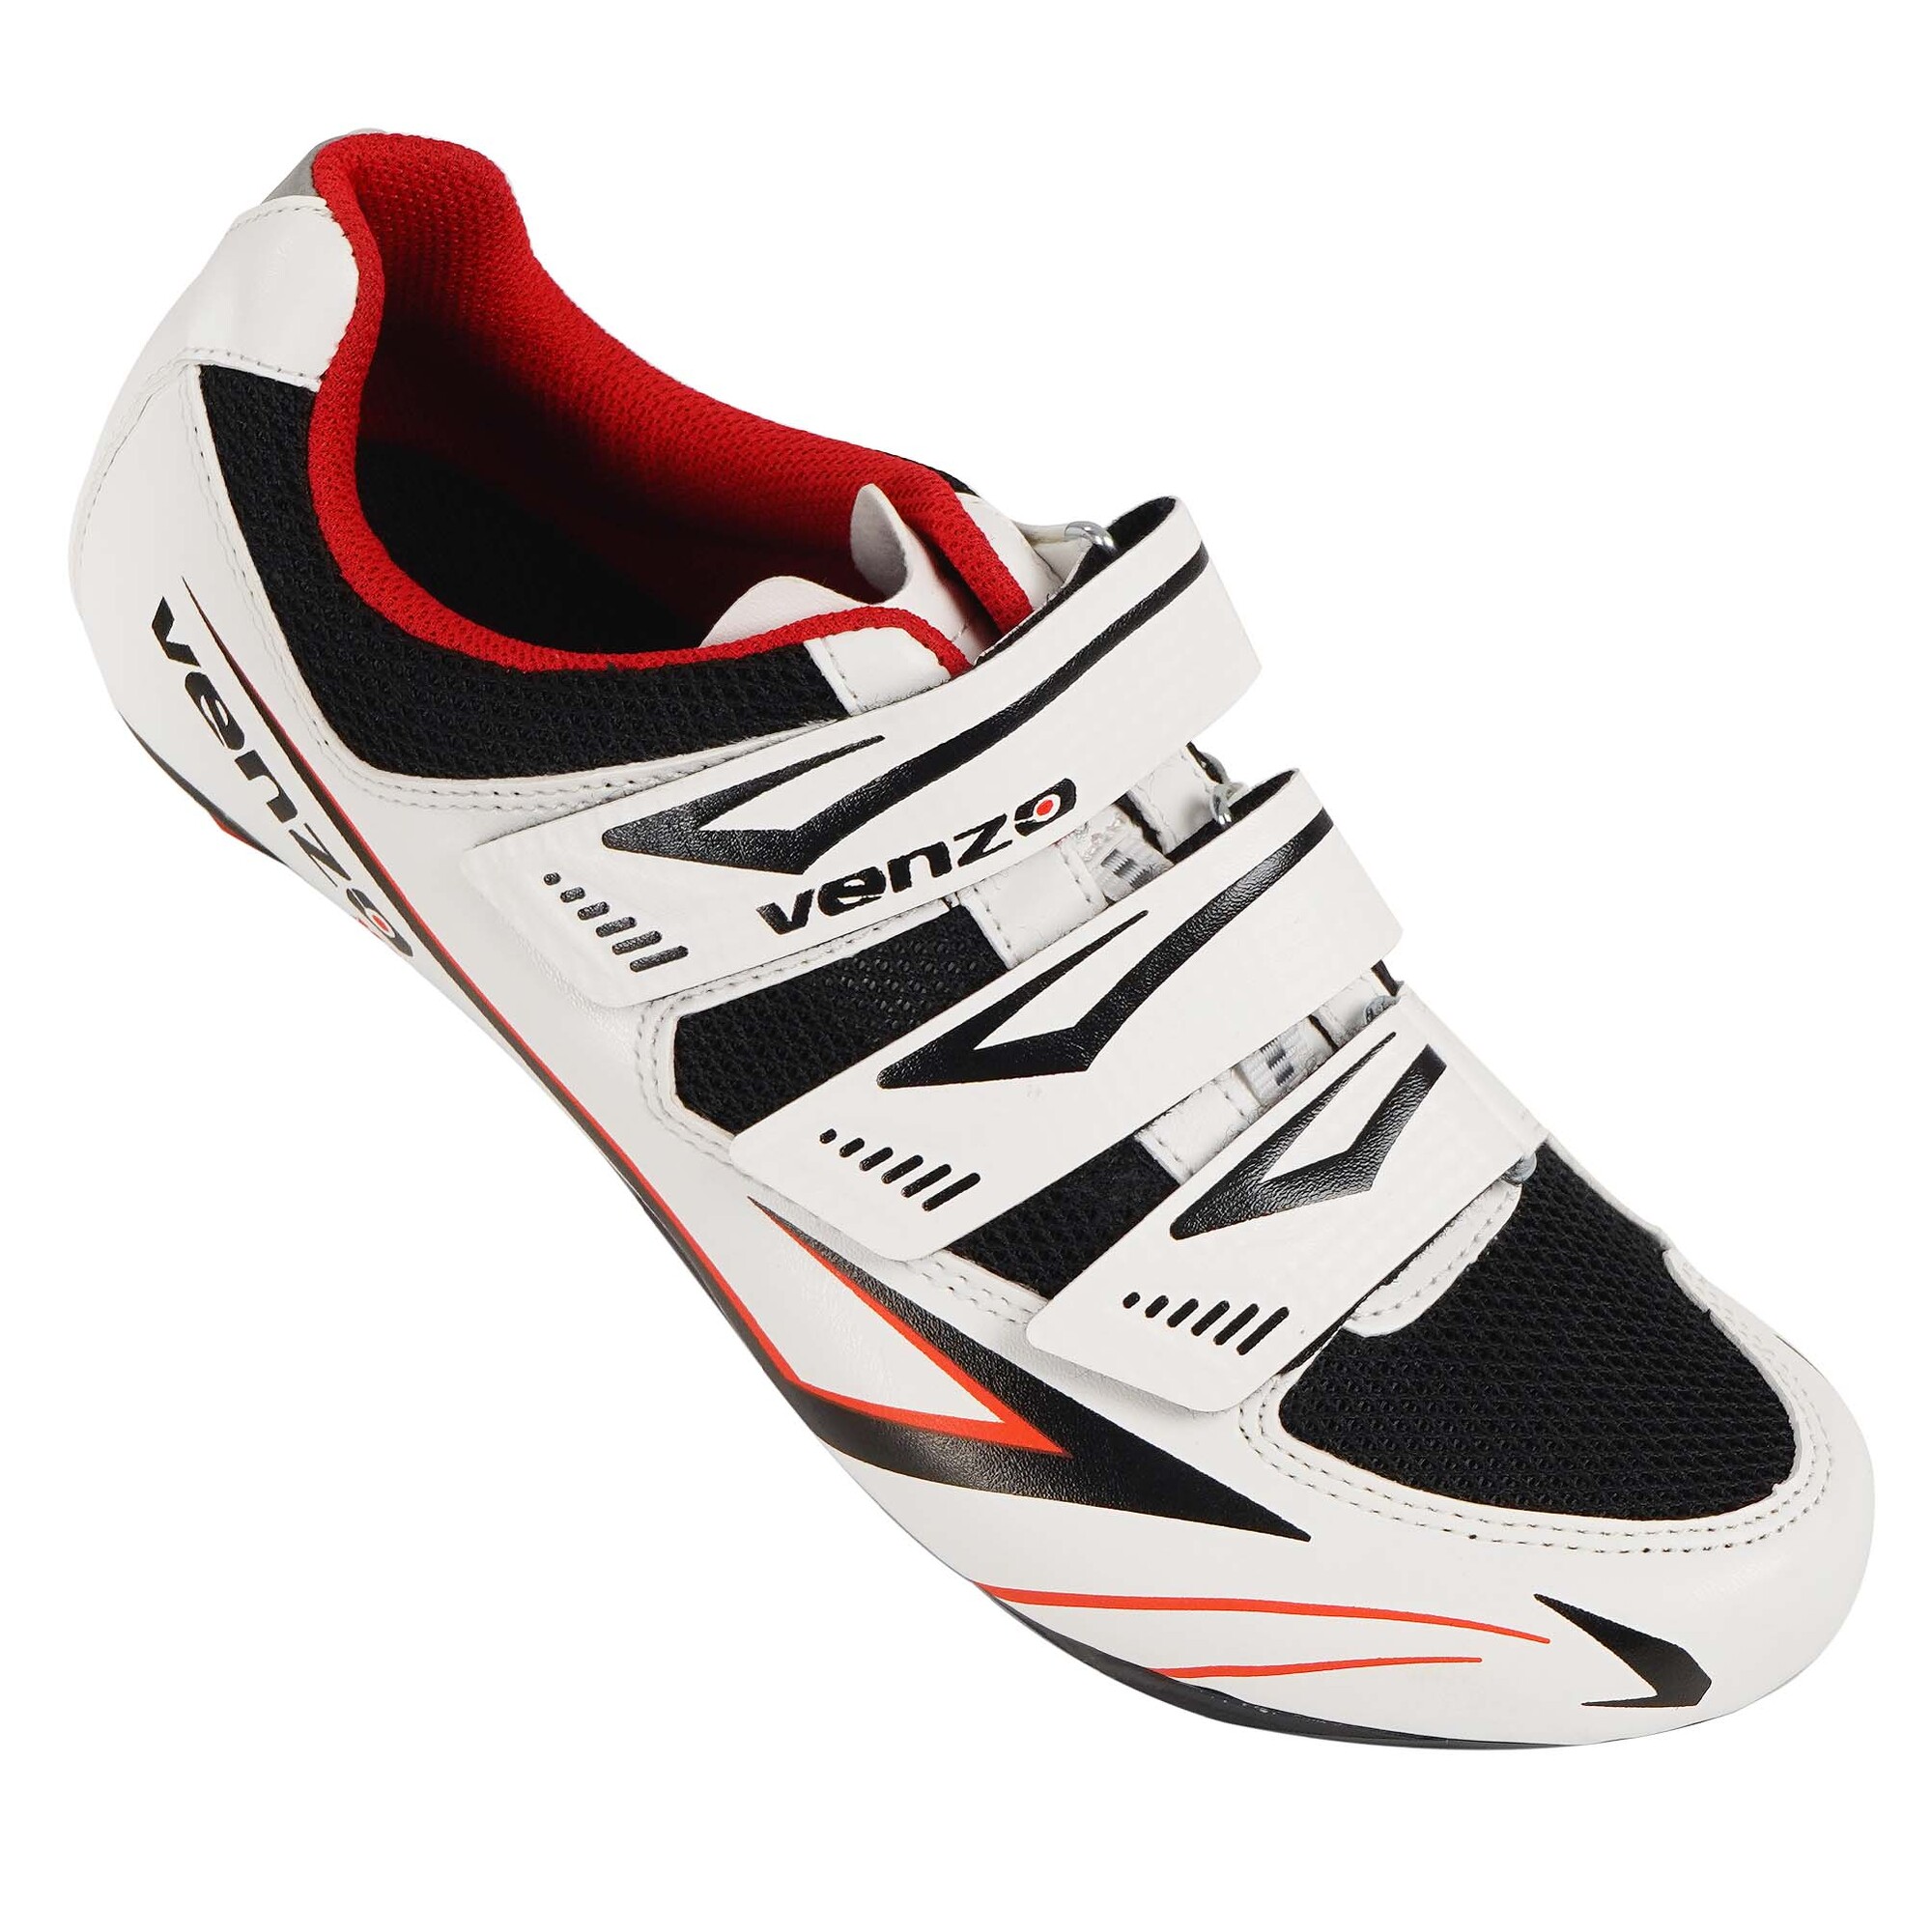 Venzo Road Bike For Shimano SPD SL Look Cycling Bicycle Shoes 44.5